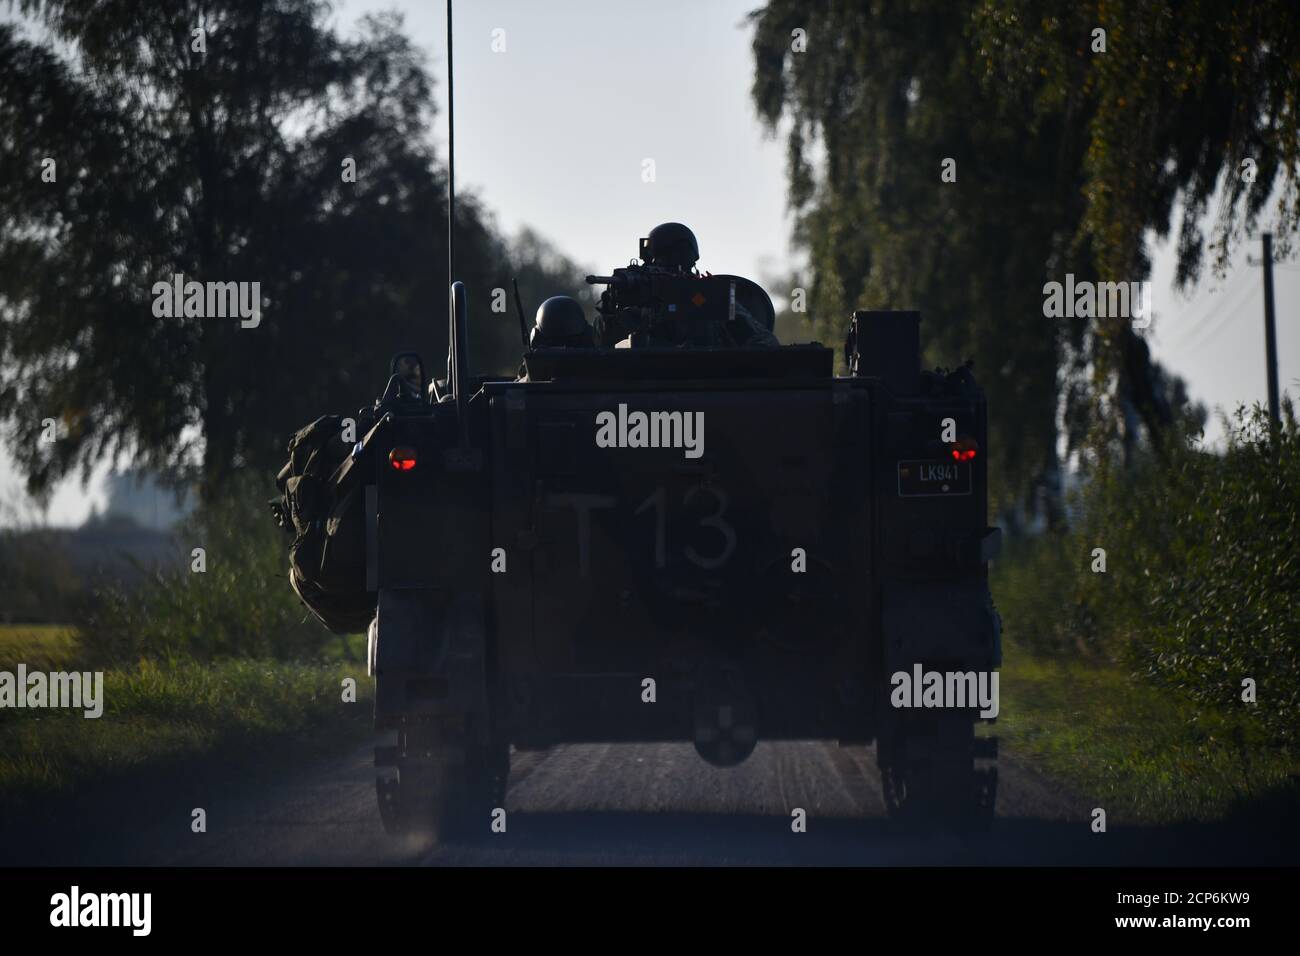 U.S. Soldiers and Lithuanian soldiers convoy to their staging point during exercise Tobruq Legacy 20 (TOLY20) in Panevezys, Lithuania, Sept. 16, 2020. TOLY20 is a multinational air defense exercise taking place from Sept. 12-27, 2020 in Lithuania, Germany and Poland. The purpose of this exercise is to enhance interoperability with NATO forces and increase readiness through the integration of land component air missile defense capabilities. Nations participating in Tobruq Legacy include Czech Republic, Estonia, France, Hungary, Italy, Latvia, Lithuania, Poland, and the United States. Lithuania Stock Photo